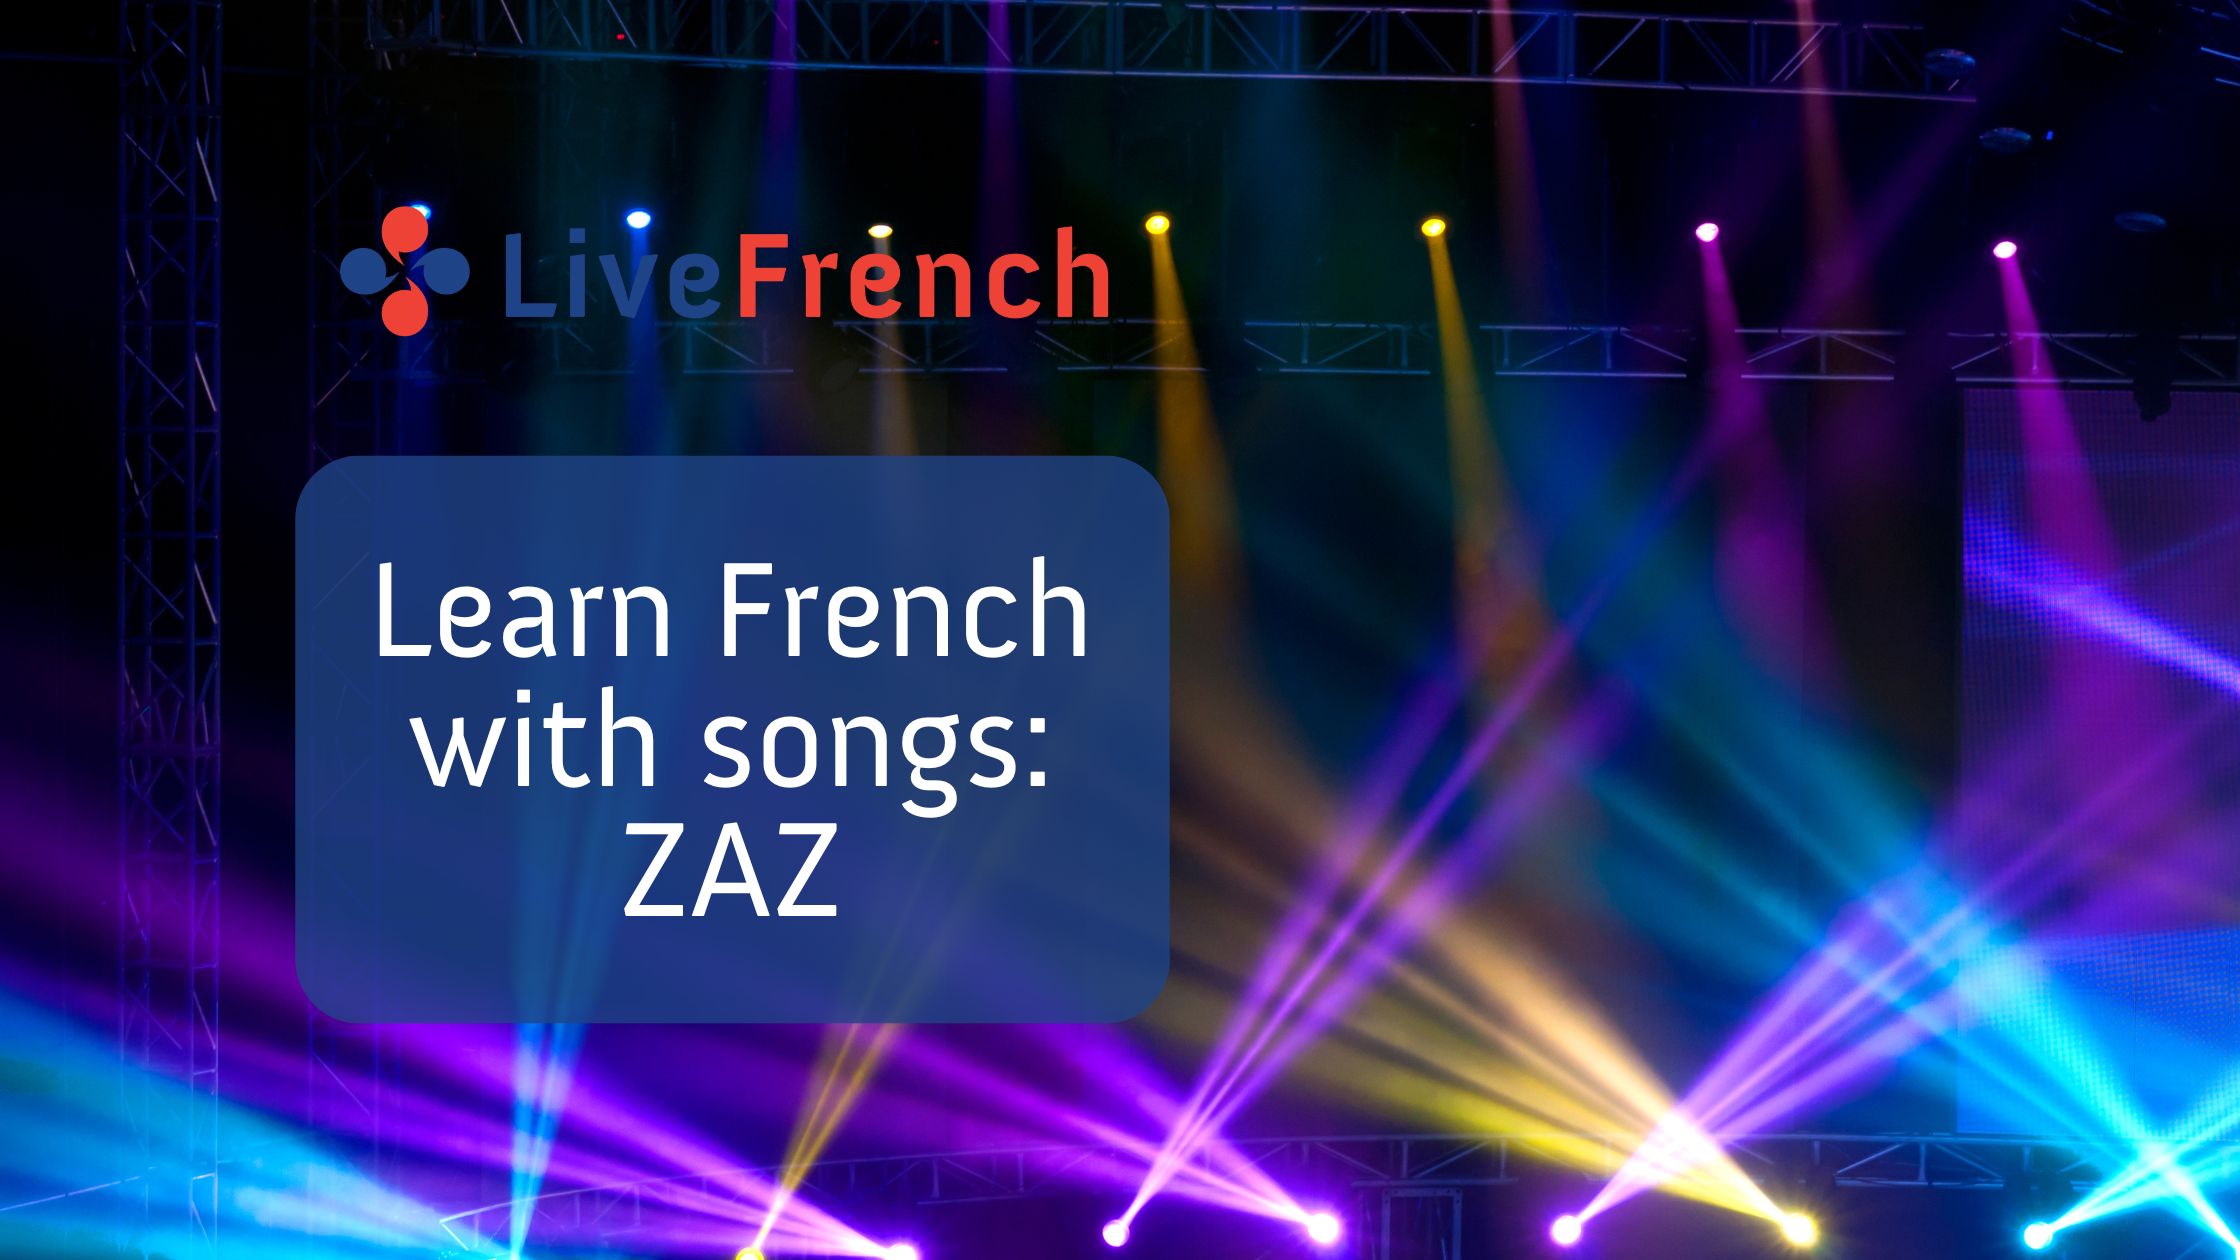 Learn French with songs: Je veux from ZAZ